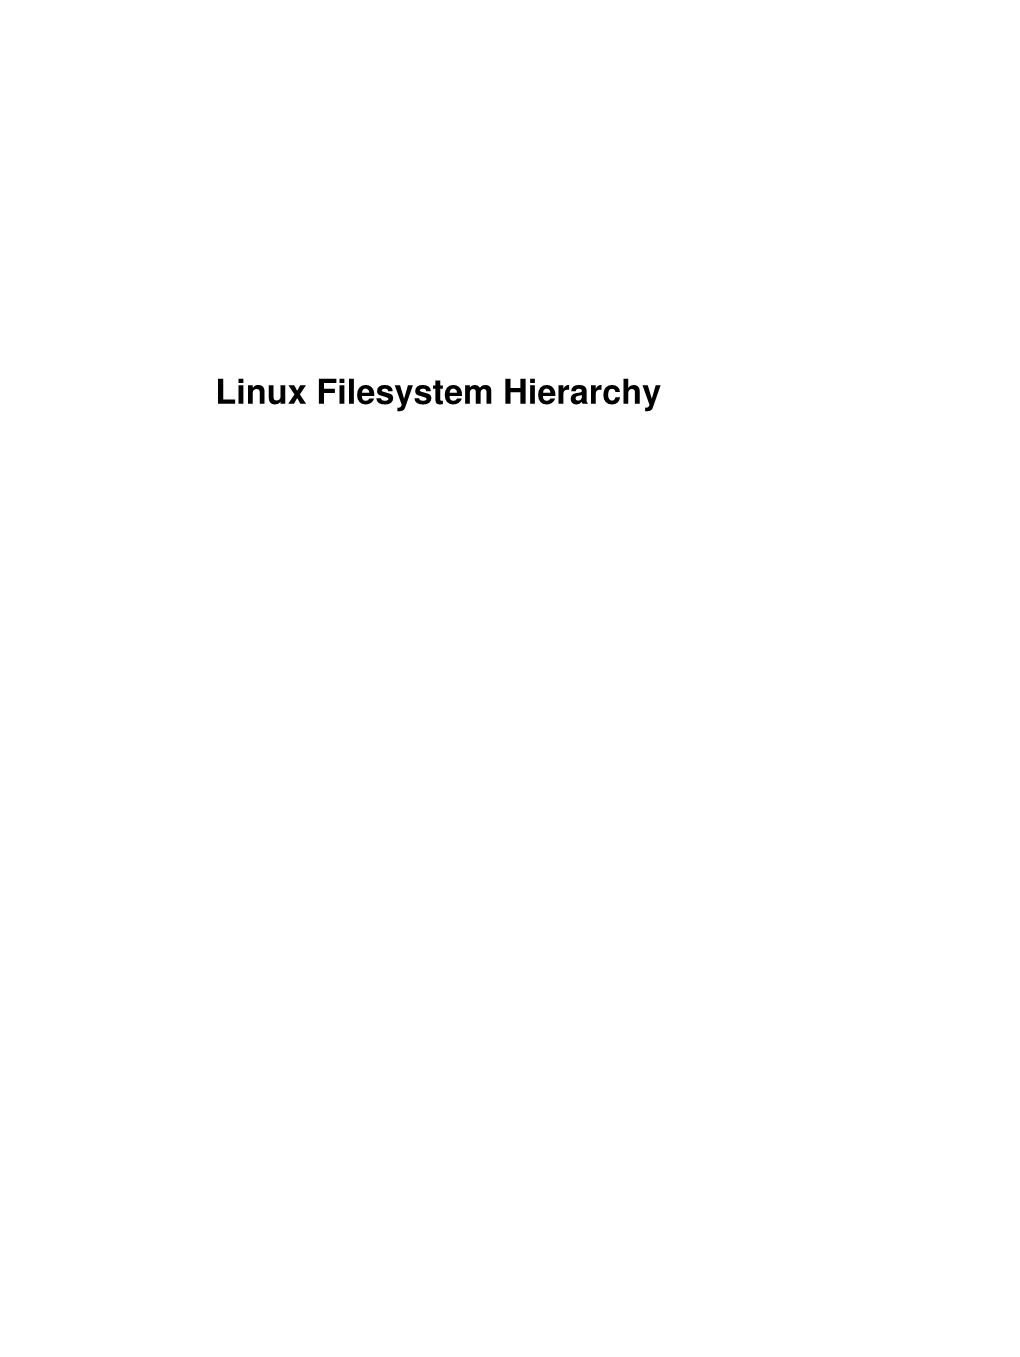 Linux Filesystem Hierarchy Chapter 1